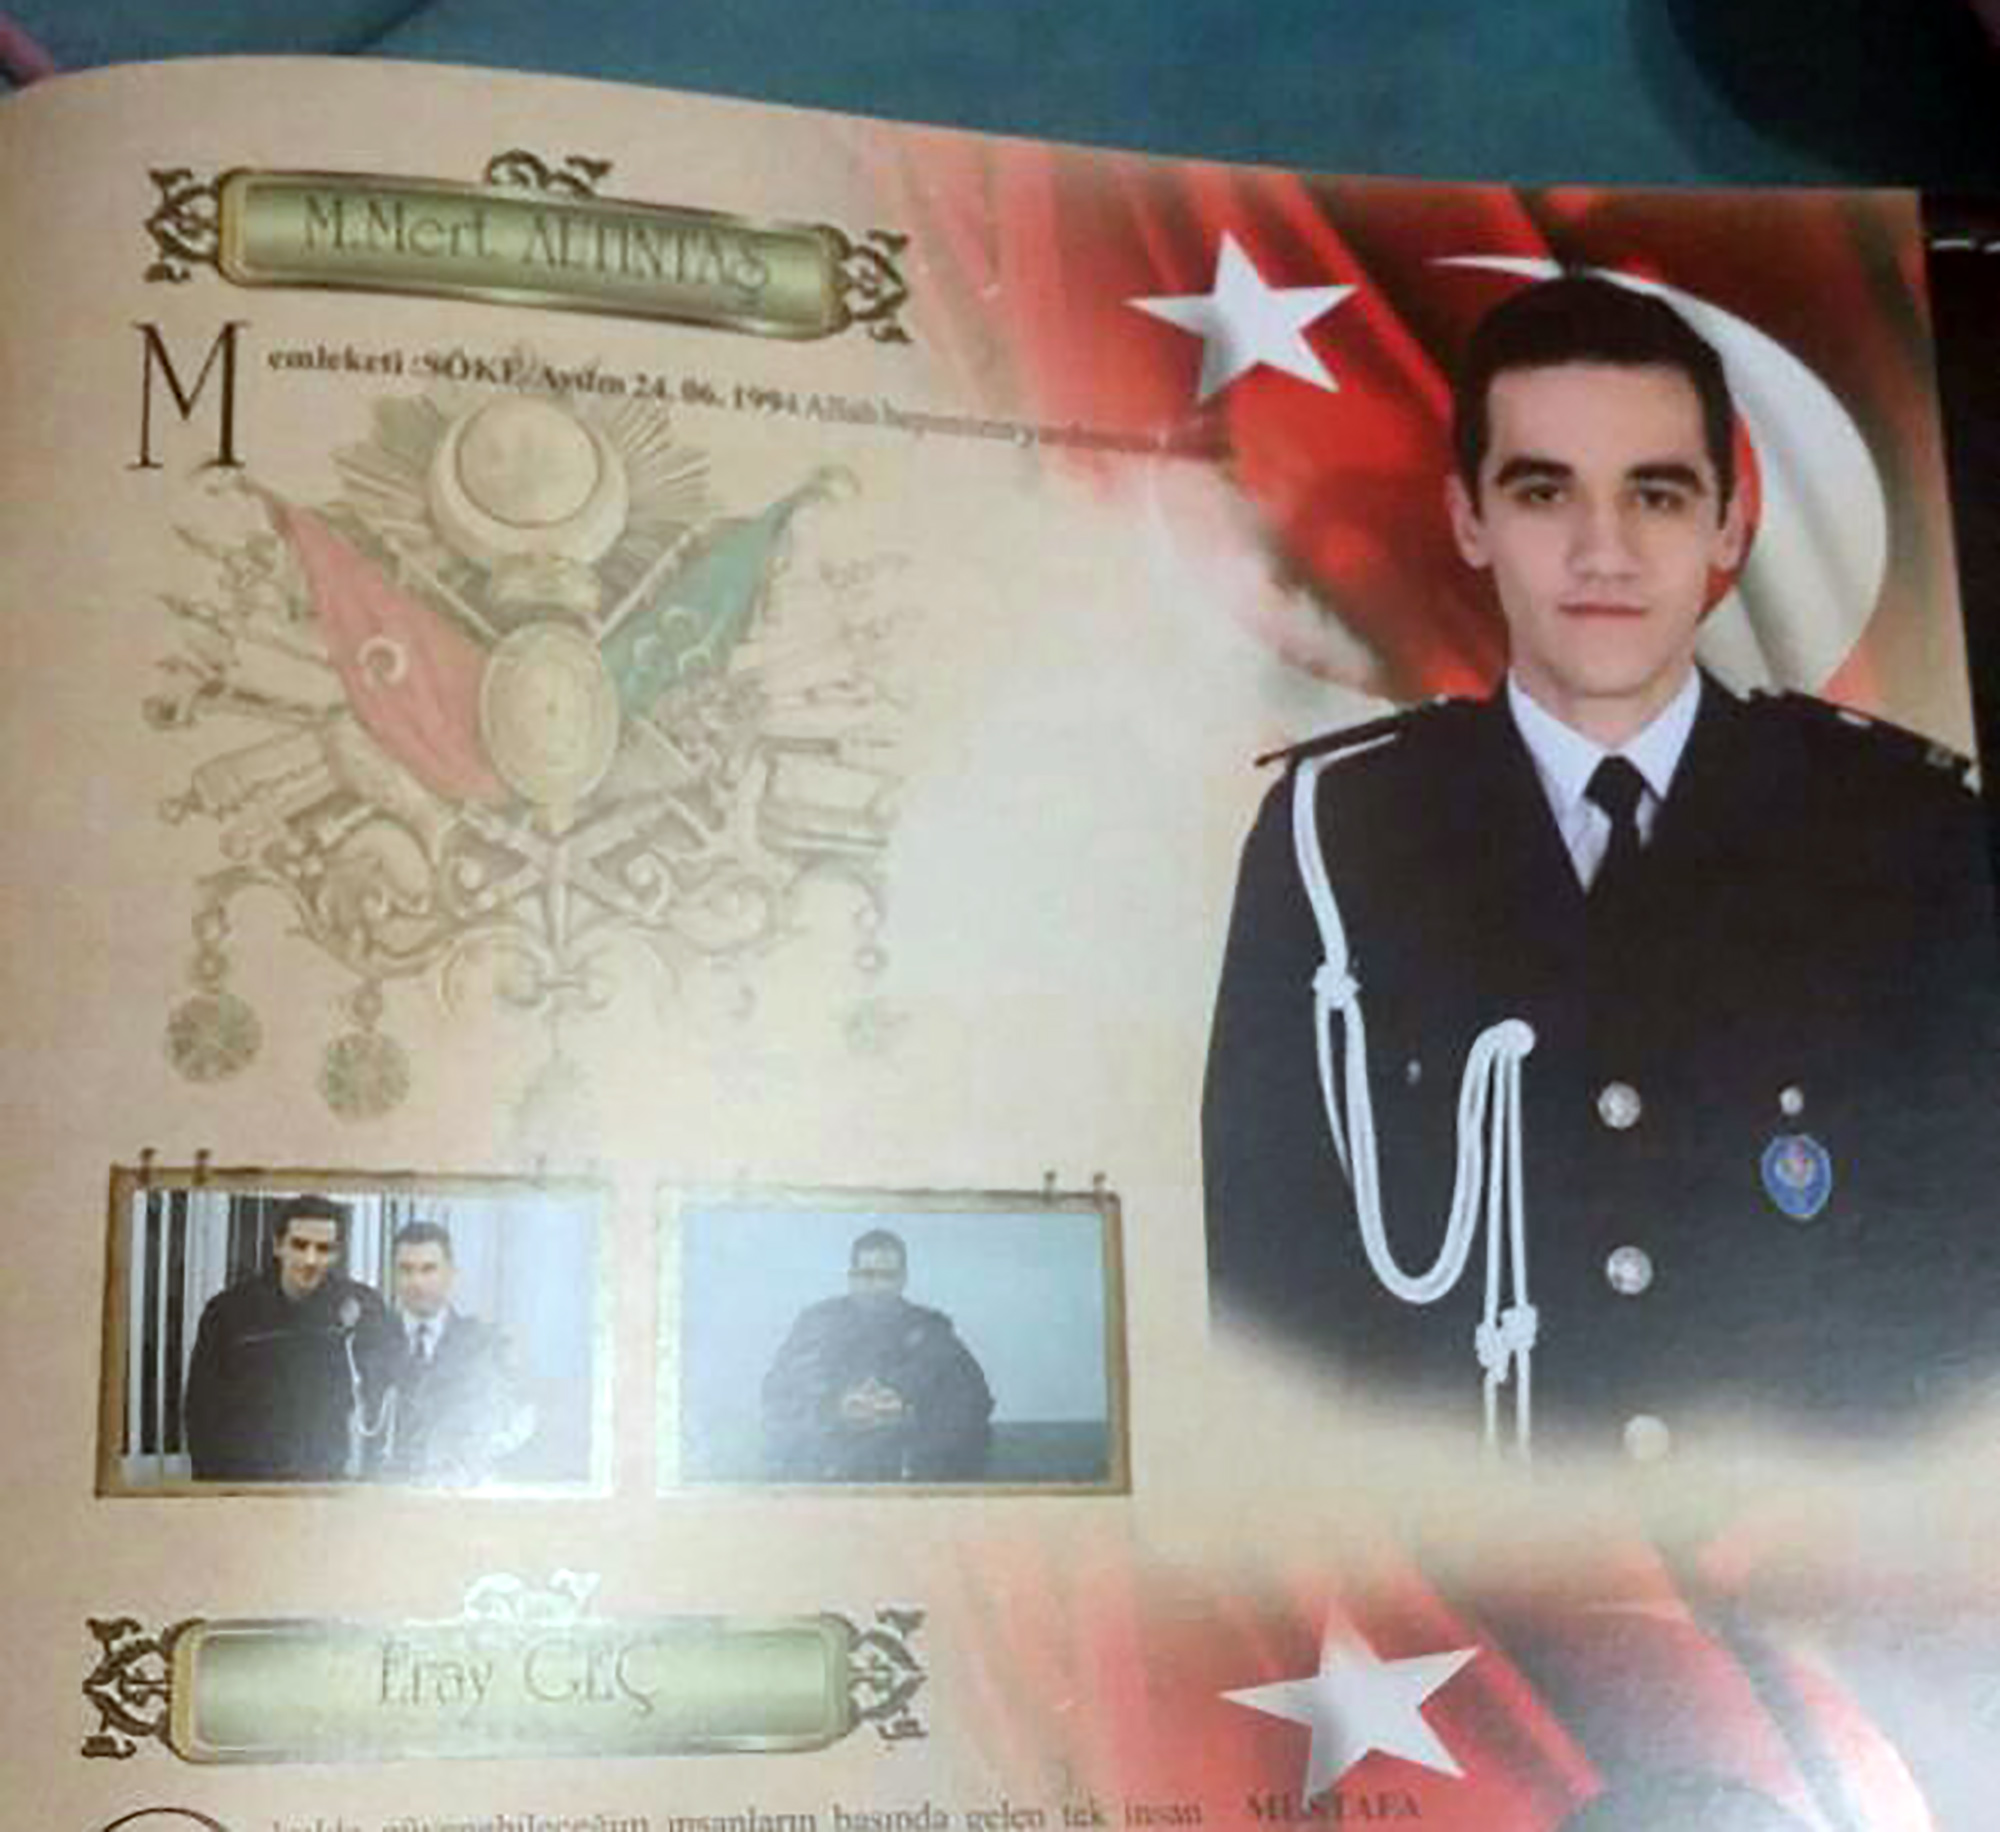 PHOTO: Mevlut Mert Altintas is pictured in his police academy graduation album in a photo obtained by ABC News after he fatally shot Russian Ambassador to Turkey, Andrei Karlov, in a photo gallery in Ankara, Turkey on Dec. 19, 2016.